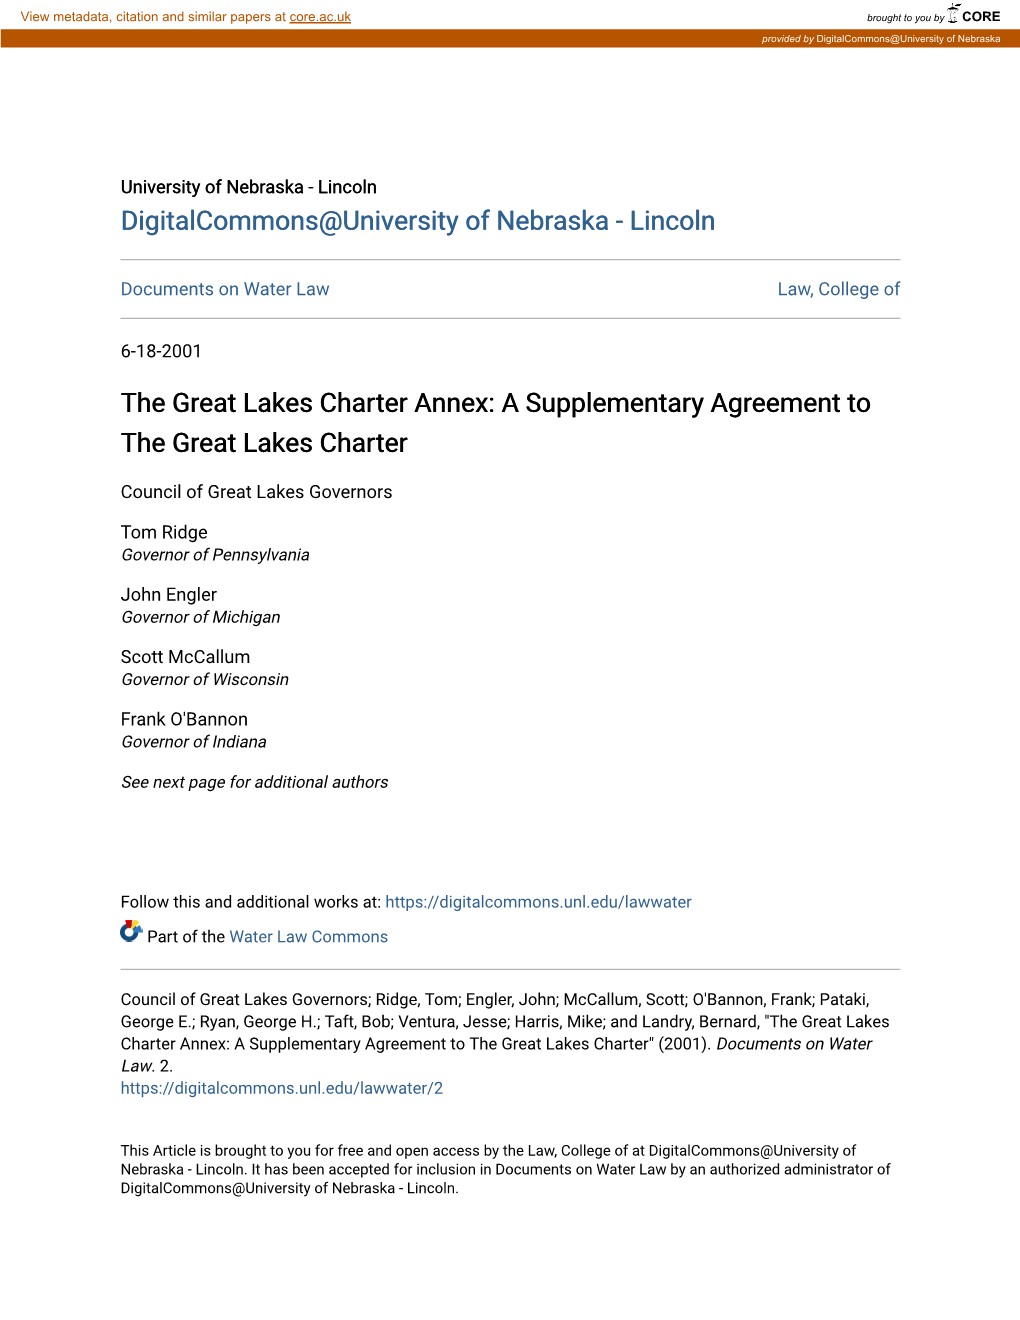 The Great Lakes Charter Annex: a Supplementary Agreement to the Great Lakes Charter